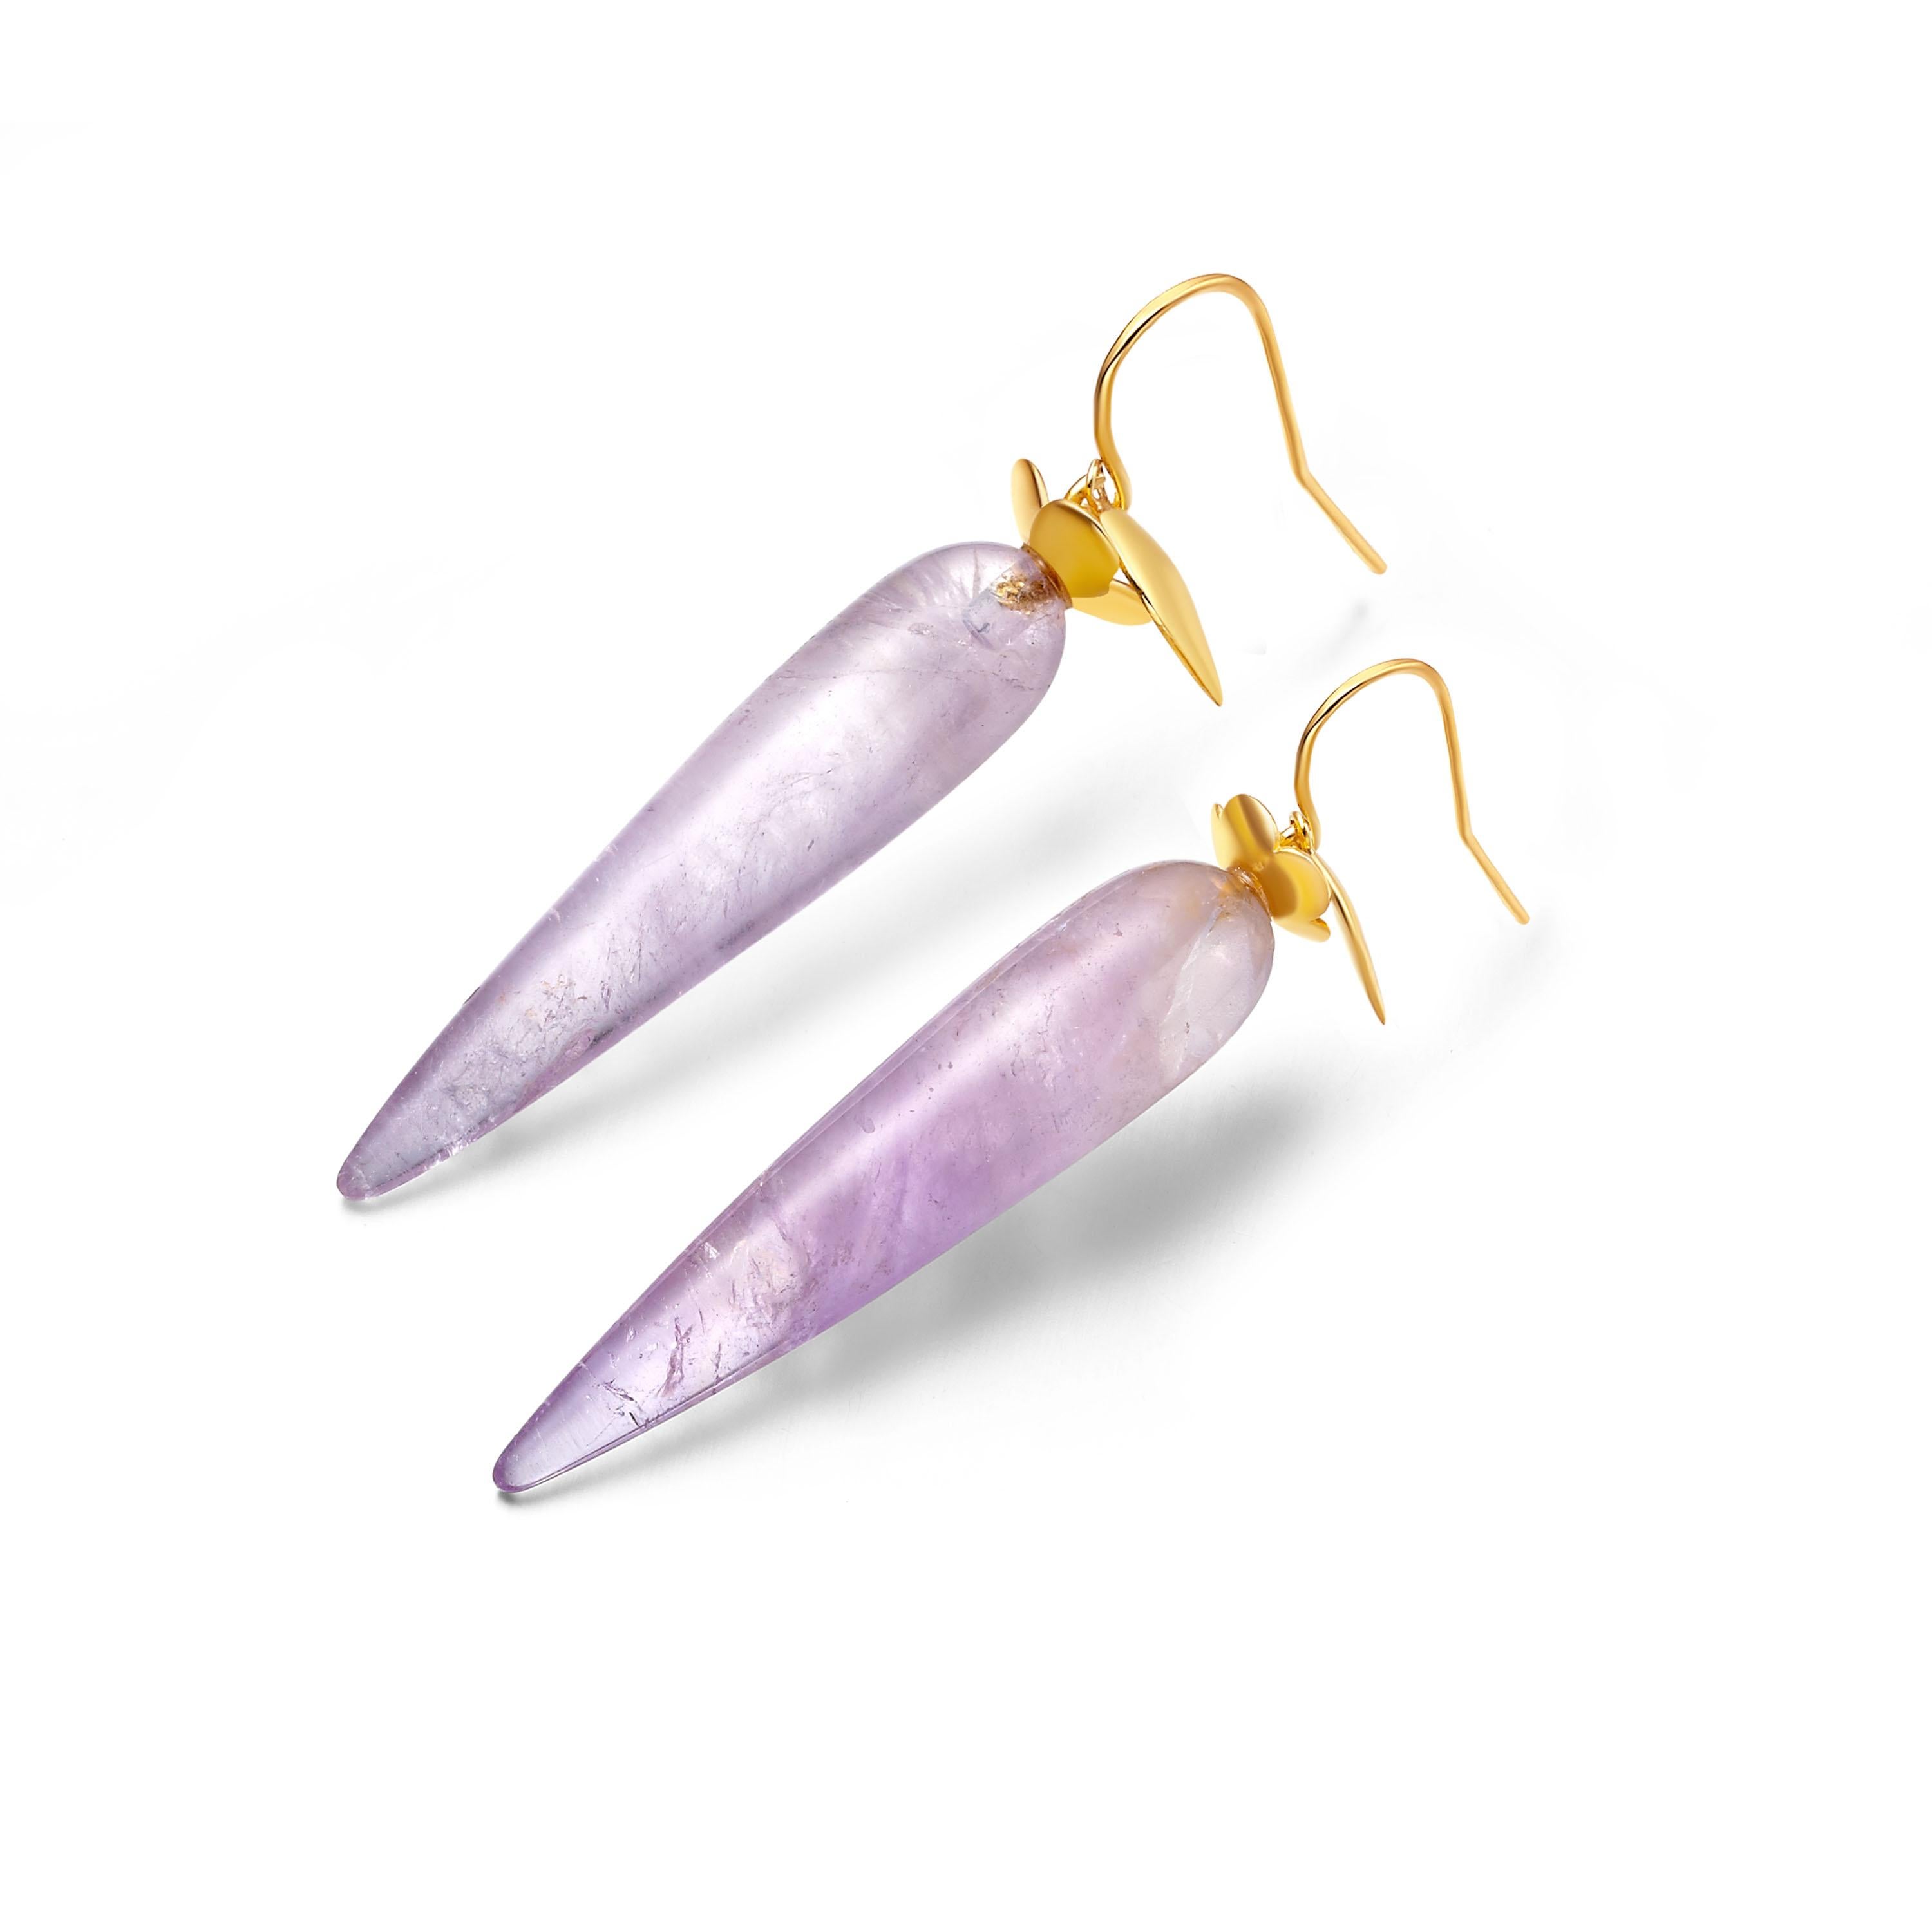 Elegant drop earrings with a touch of lavender, featuring teardrops of purple amethyst with excellent translucency, adorned with delicate petals of 18ct gold plate on sterling silver.

- Size (LxW): 51mm x 9mm
- Weight per earring: 5.2gm
- Earring